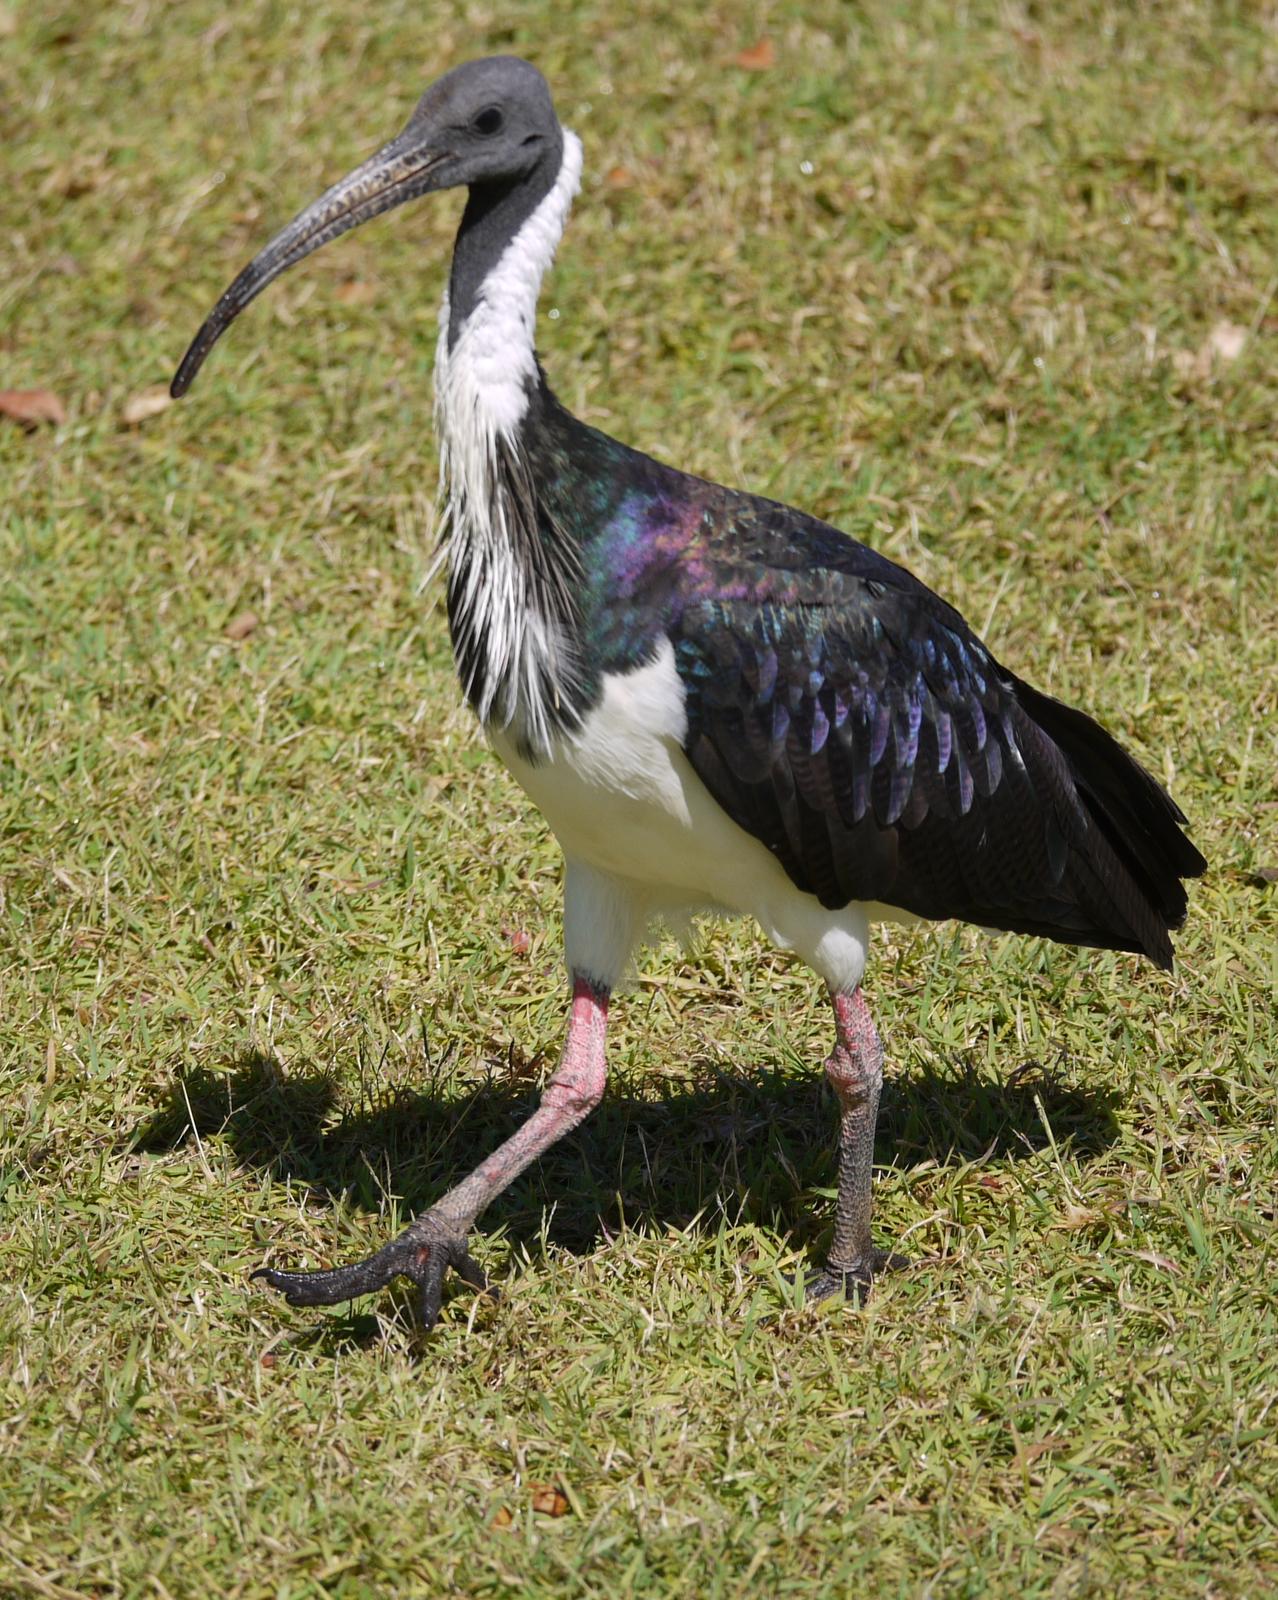 Straw-necked Ibis Photo by Peter Lowe